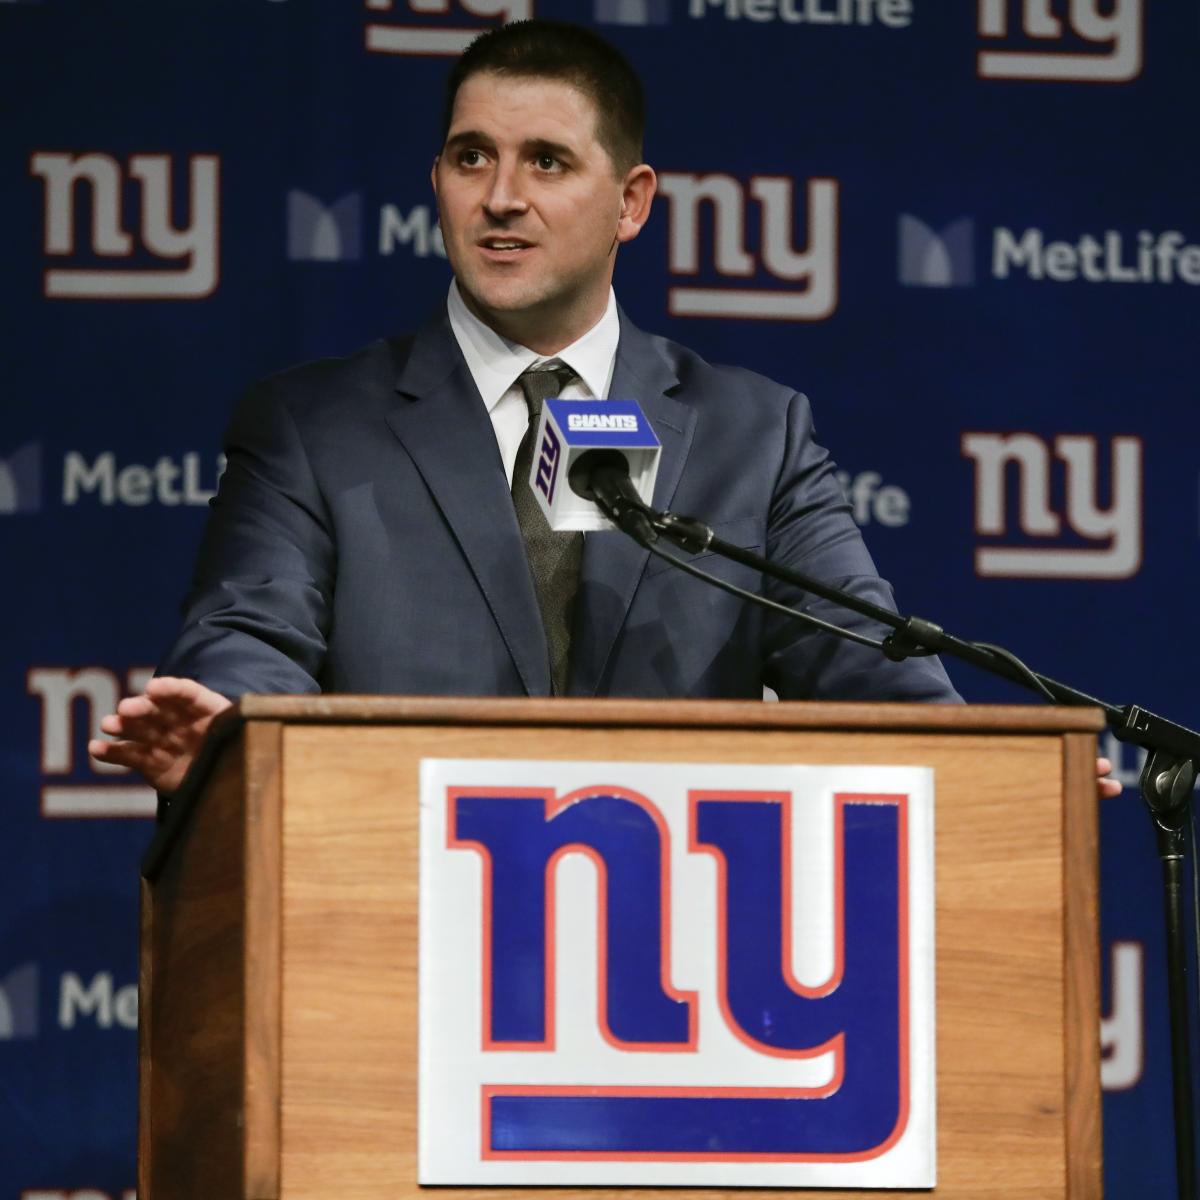 Giants Rumors Joe Judge Gets 5 Year Contract As New Head Coach Bleacher Report Latest News Videos And Highlights